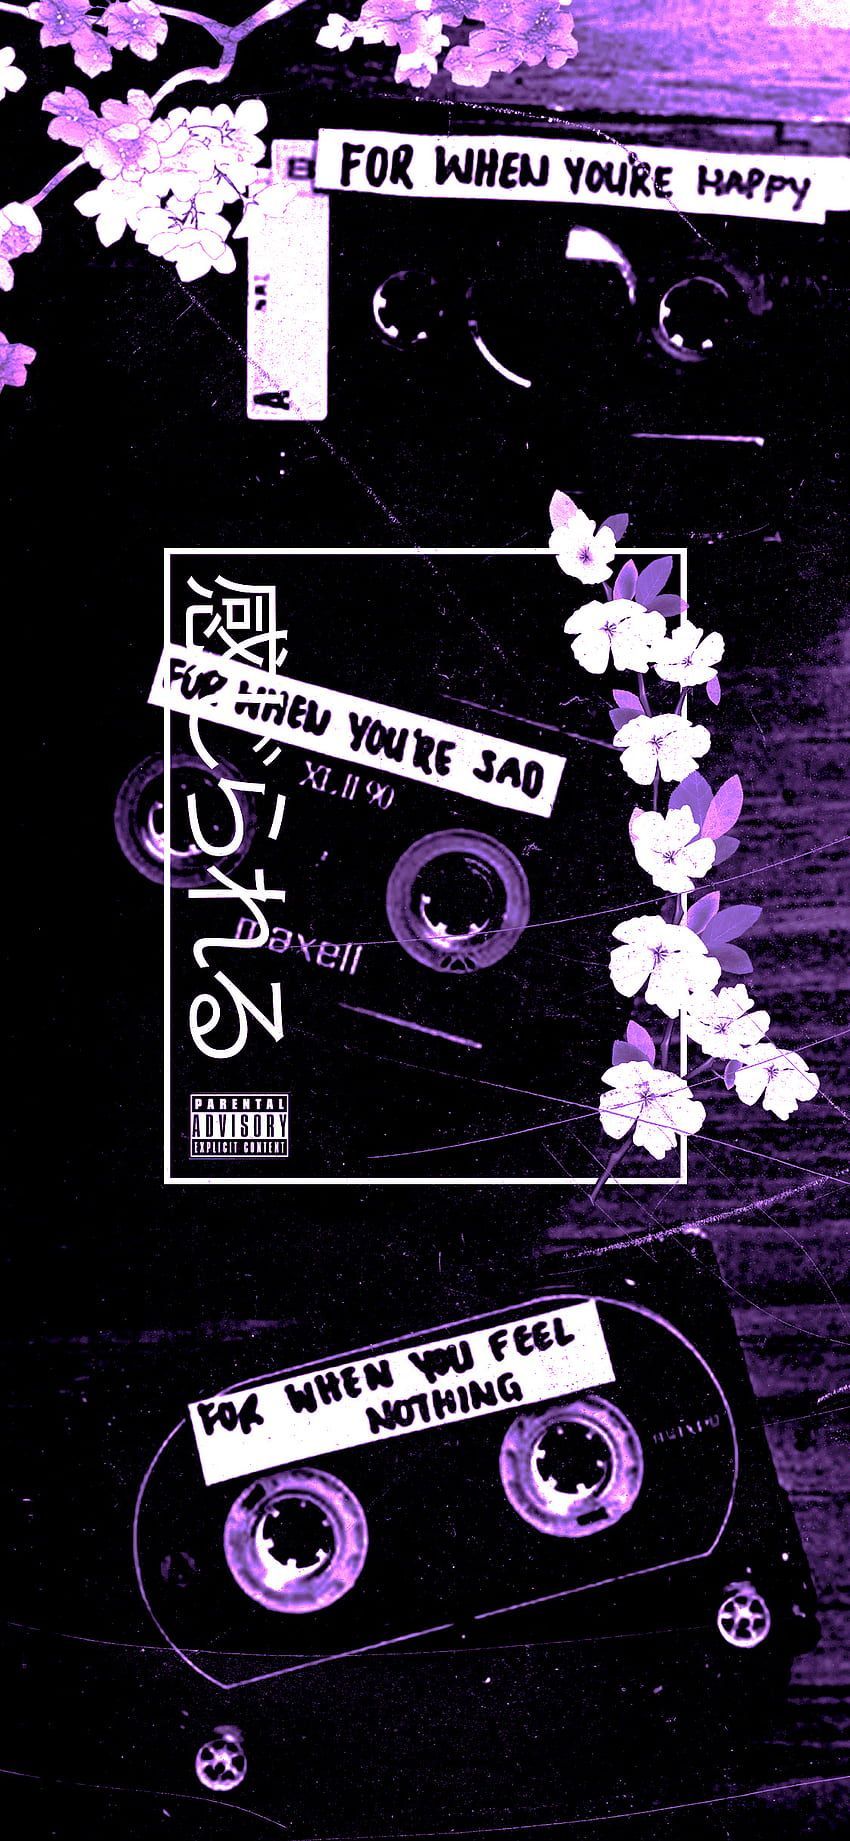 A cassette tape with purple flowers on it - Magenta